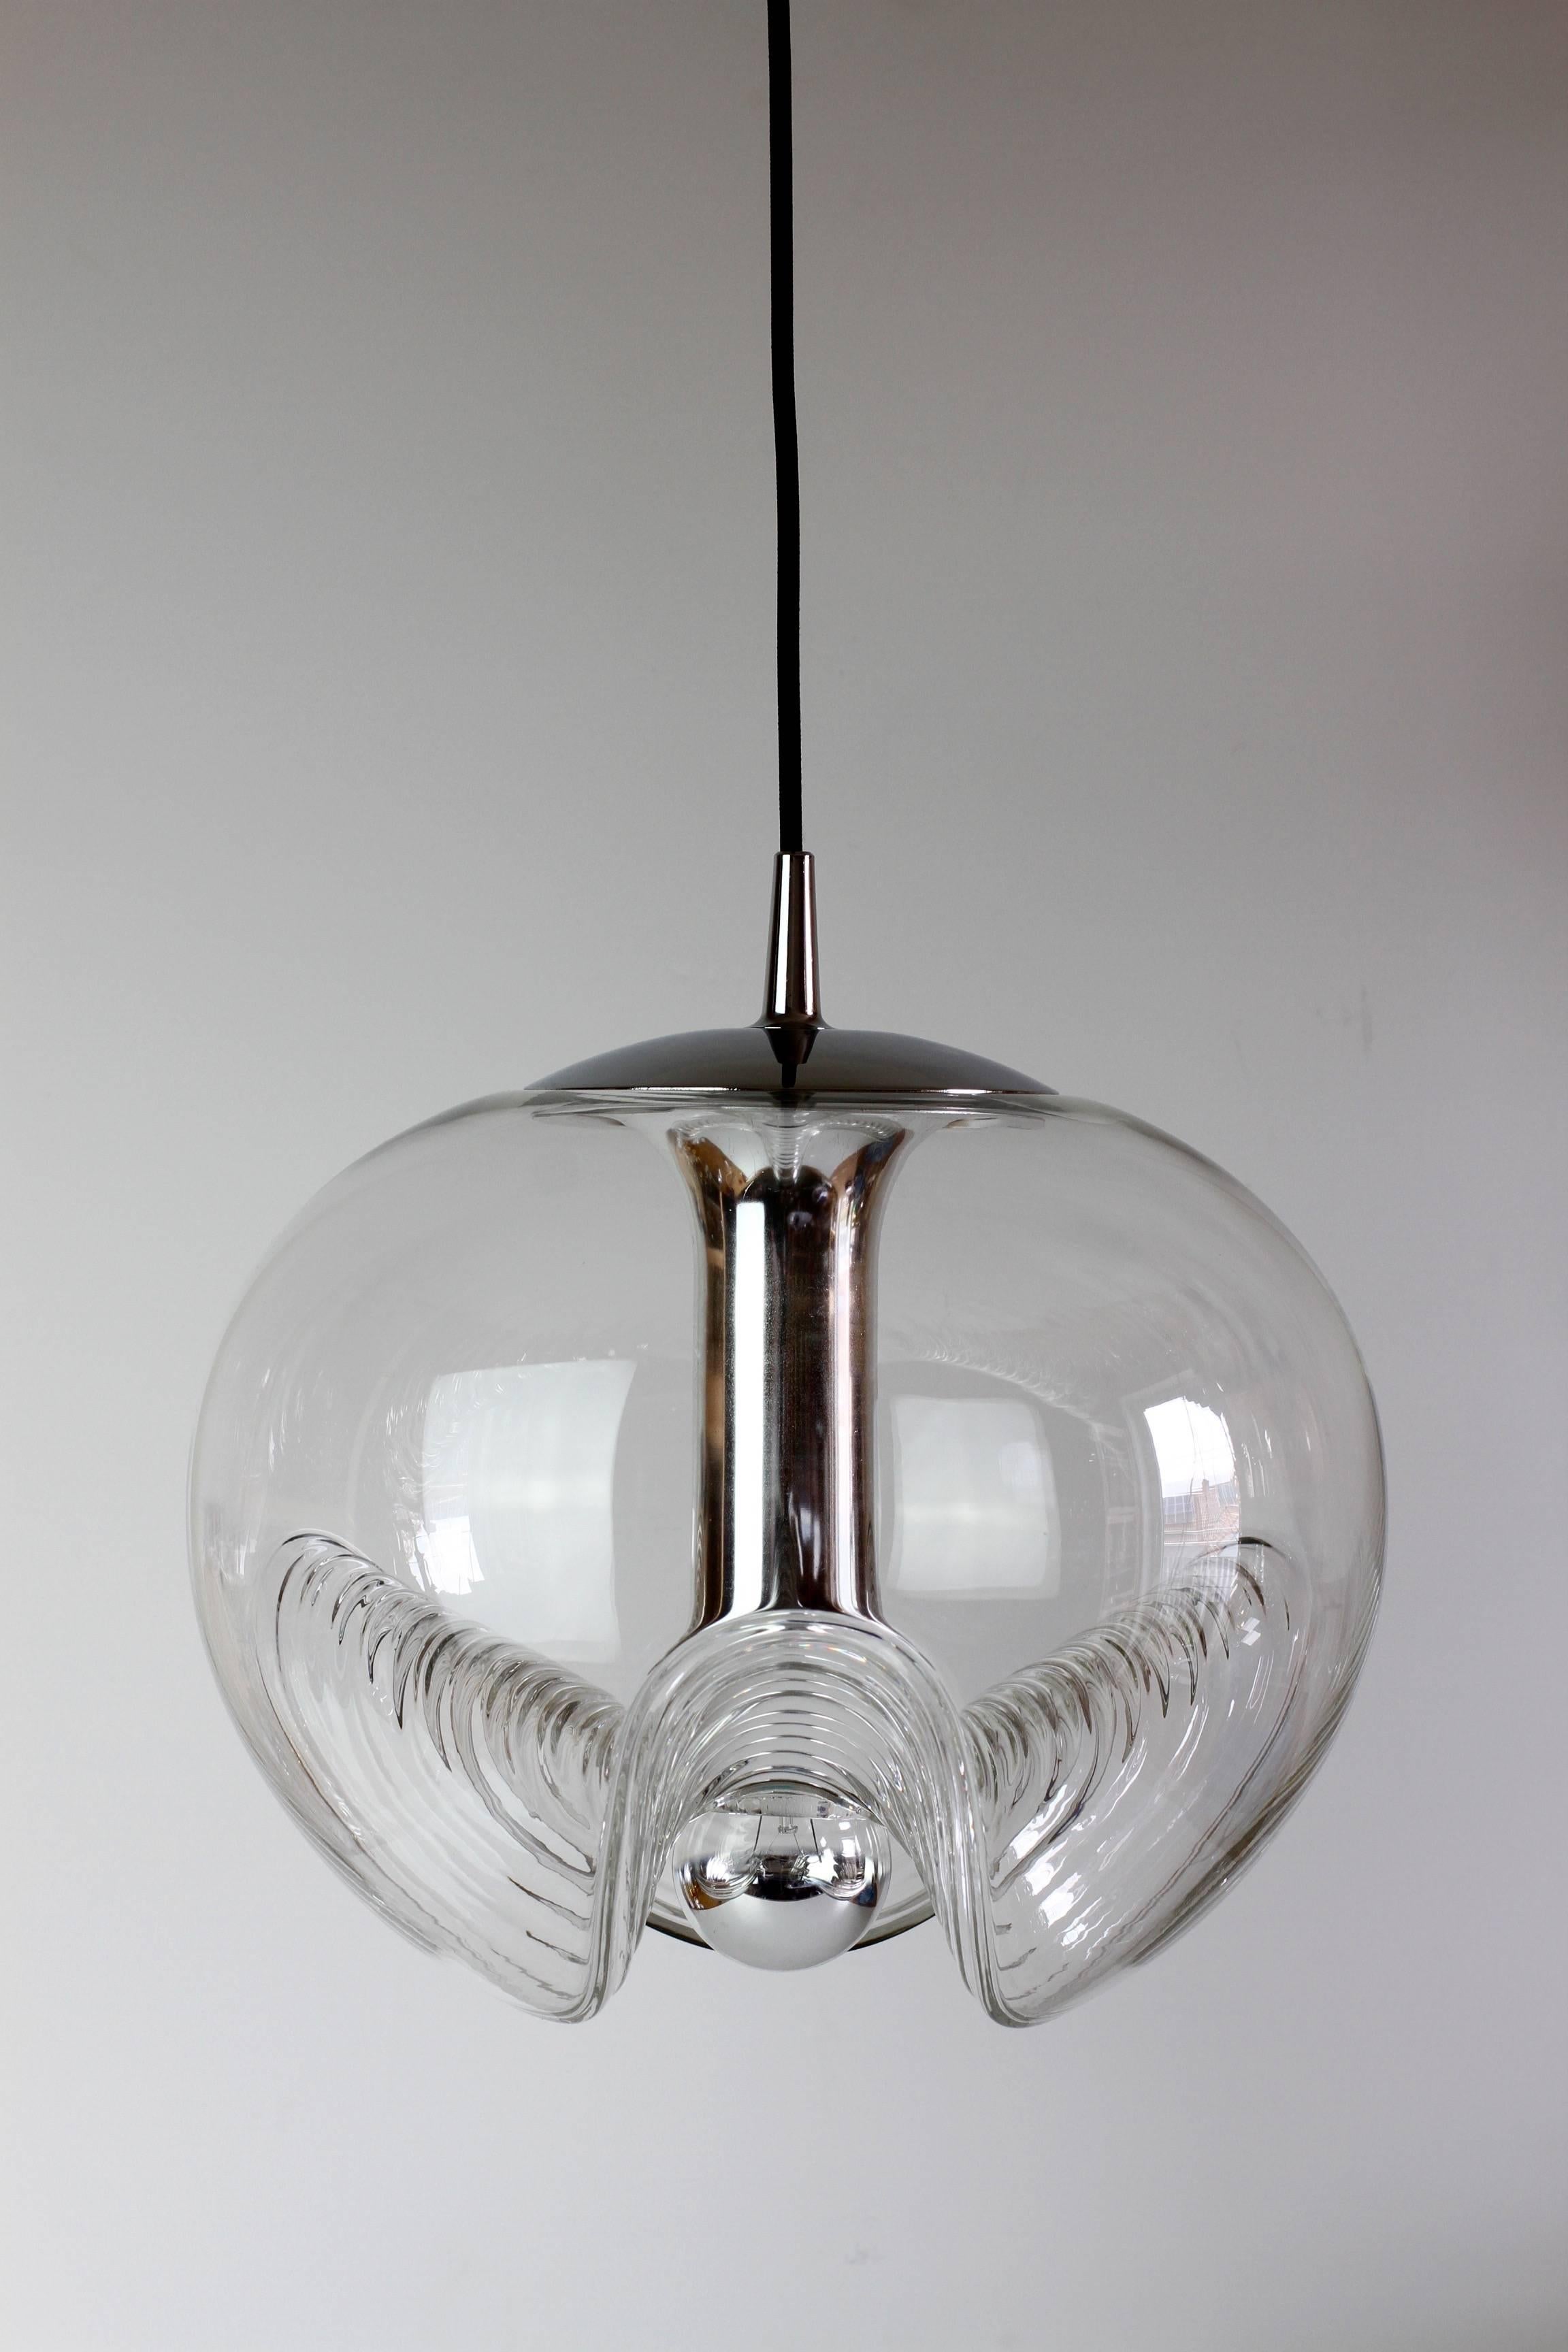 Beautiful midcentury design by Koch & Lowy for Peill & Putzler in the 1970s. This is an absolutely Classic piece of design, featuring a clear glass globe shade with a waved or ribbed molded bubble form, casting a beautiful rippled light. 

This is